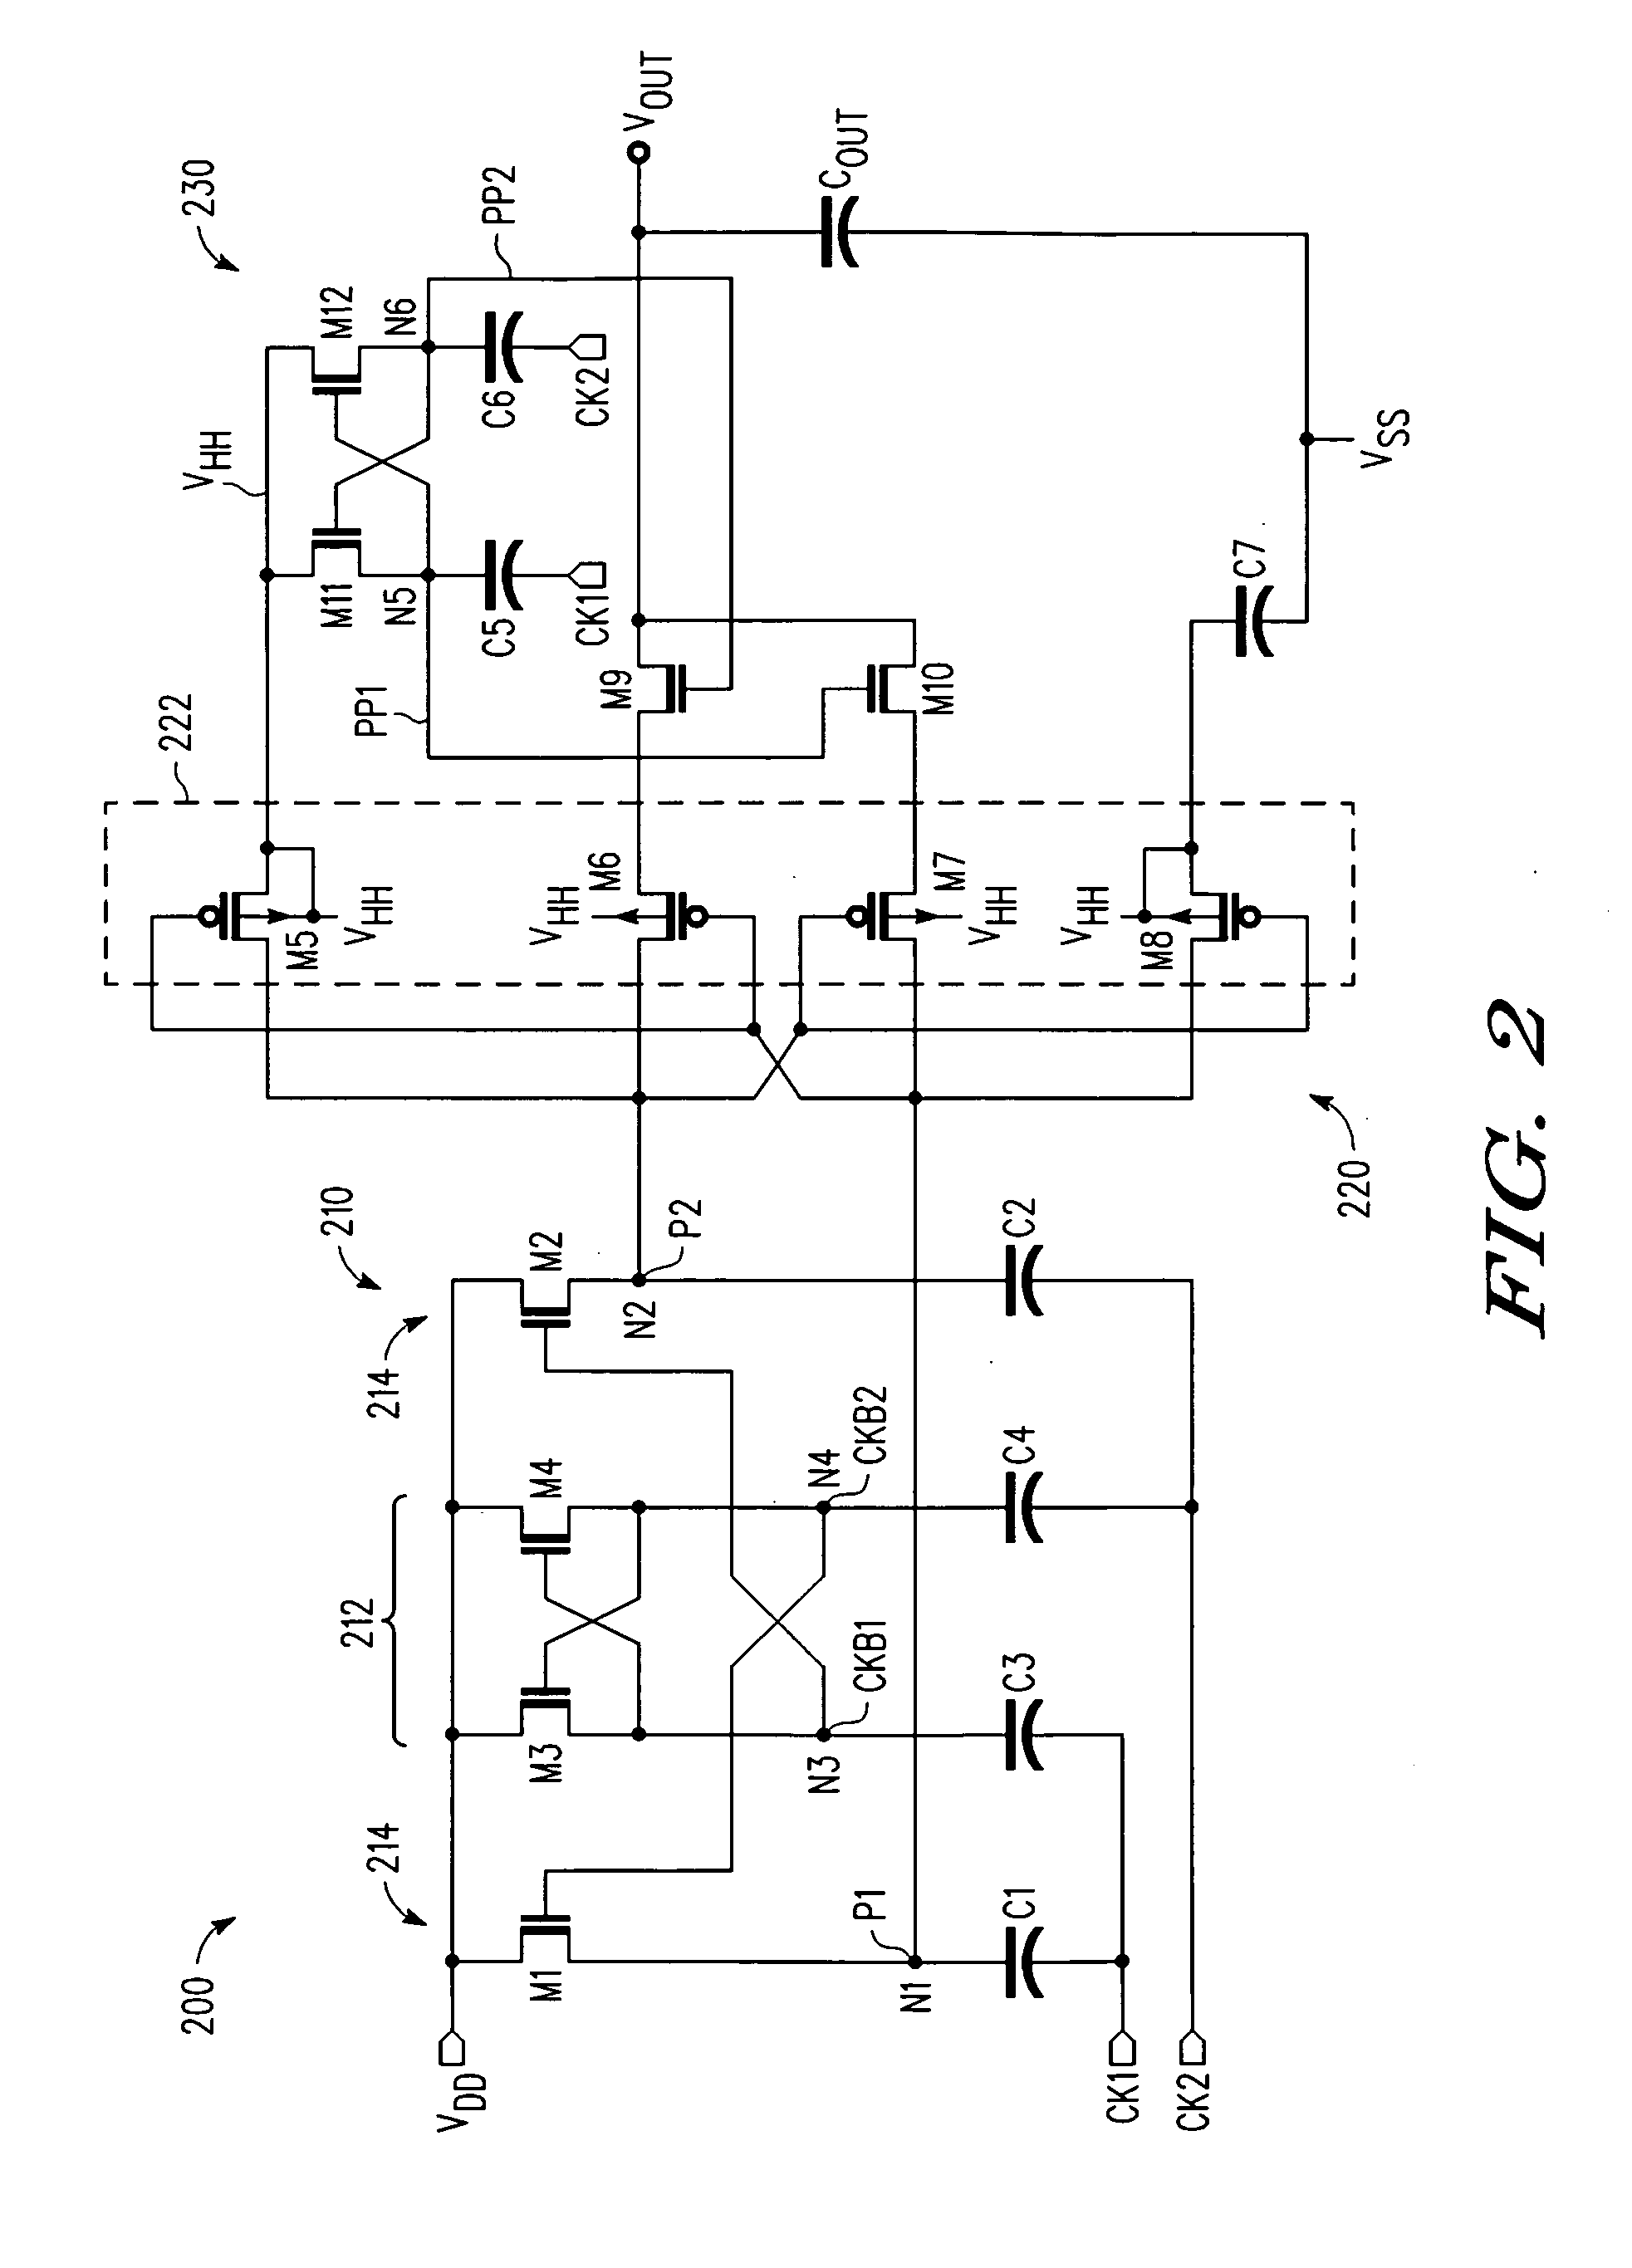 Voltage multiplier with improved efficiency